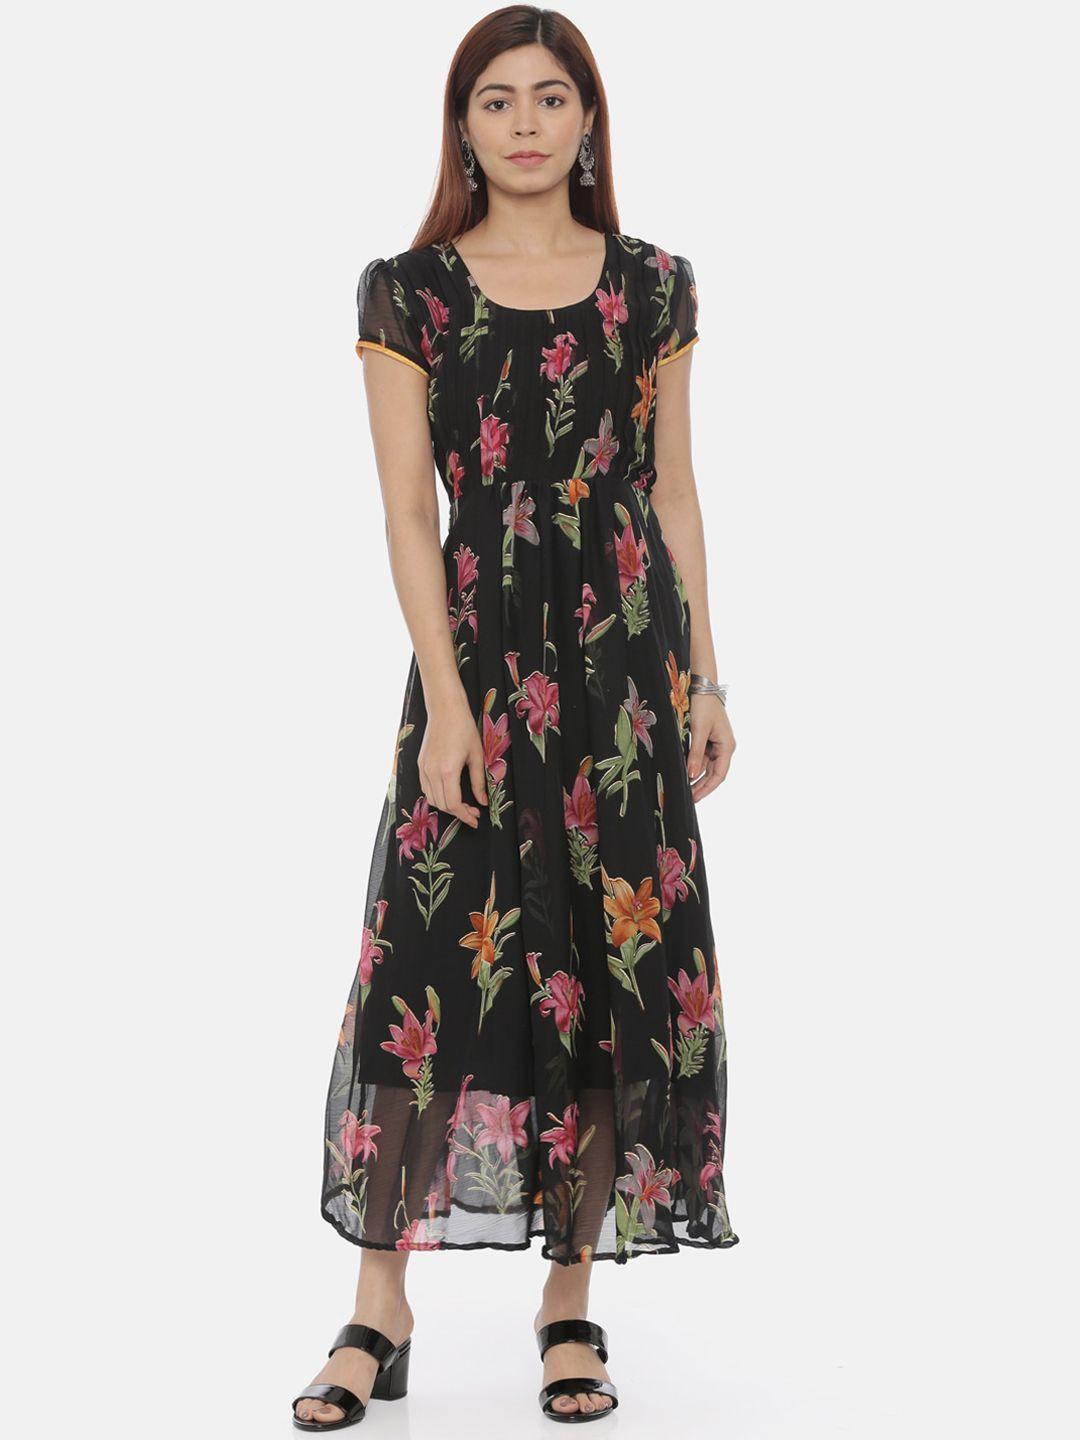 souchii-women-black-printed-fit-and-flare-dress